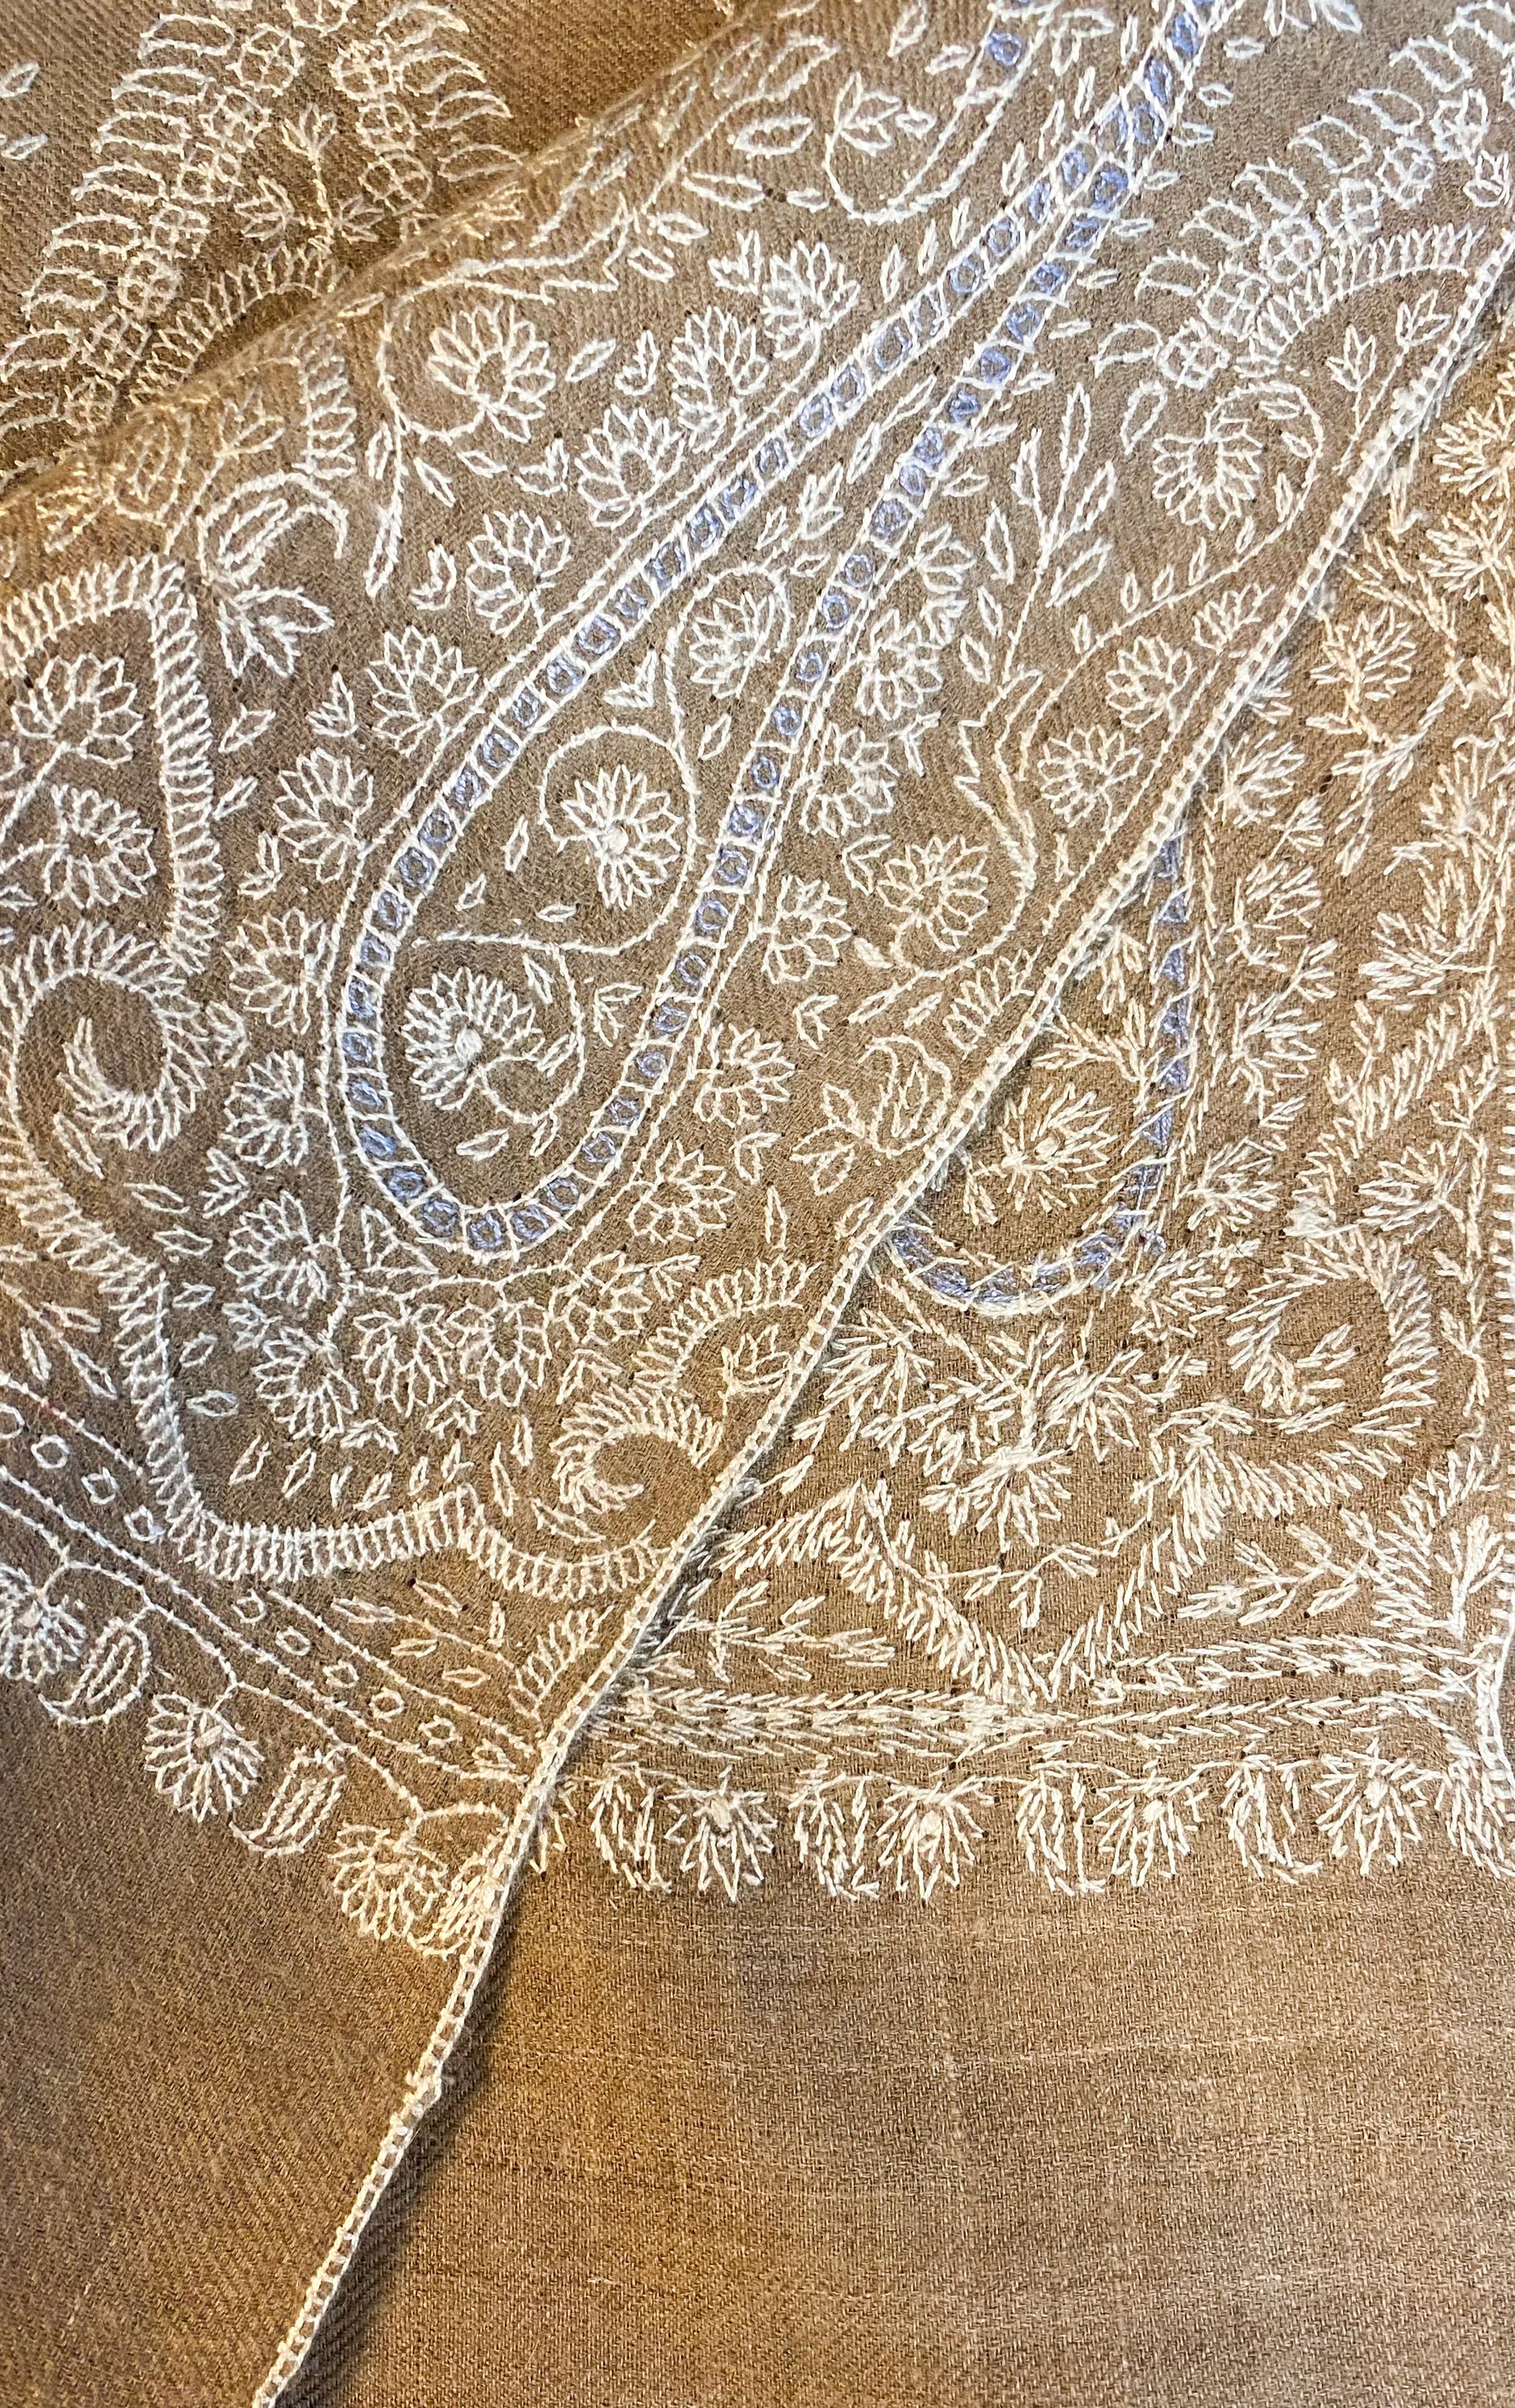 A luxurious beige pashmina shawl, handcrafted from 100% cashmere in Srinagar, India. Measuring 200x104 cm, it features intricate Sozni embroidery with patterns in white and light blue, adding sophistication and charm. This lightweight shawl, weighing 200 grams, offers warmth without bulk and is versatile for various styles, embodying heritage and elegance in wearable art.